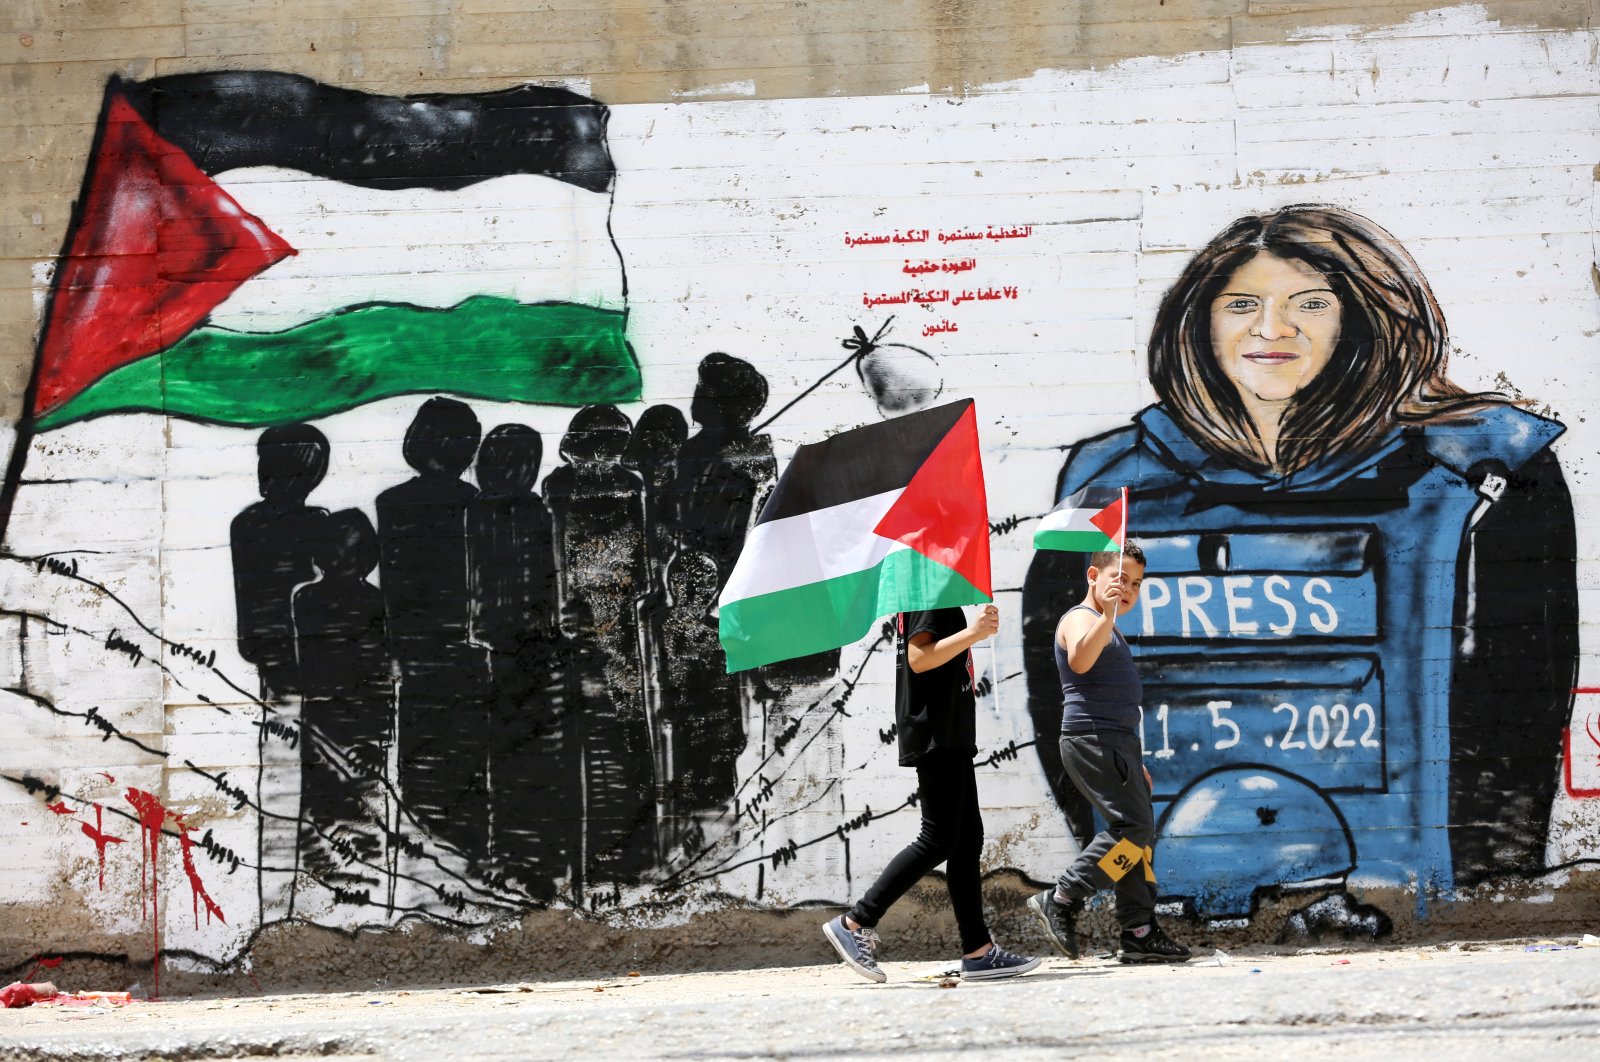 Palestinians walk in front of a mural for Al-Jazeera journalist Shireen Abu Akleh in the West Bank, Palestine, May 16, 2022. (EPA Photo)